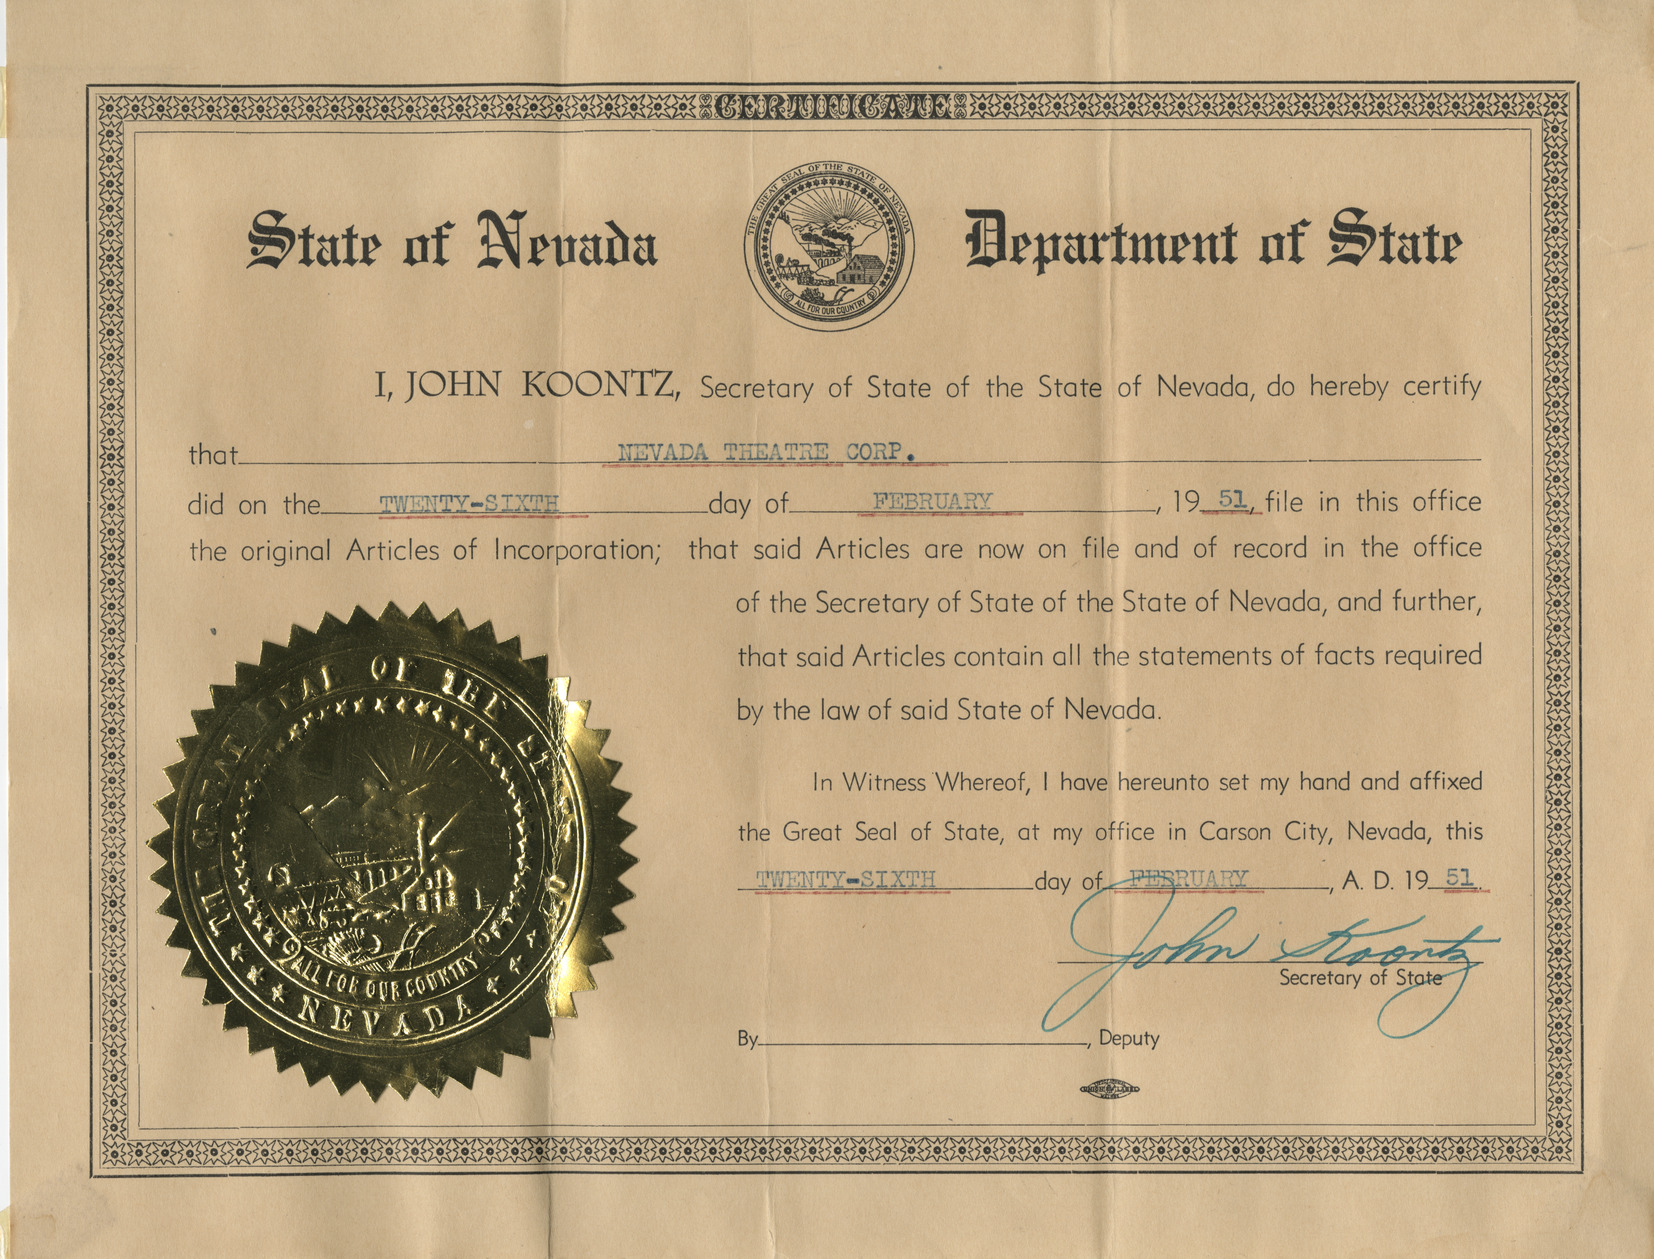 Articles of incorporation certificate for the Nevada Theater Corporation, February 26, 1951